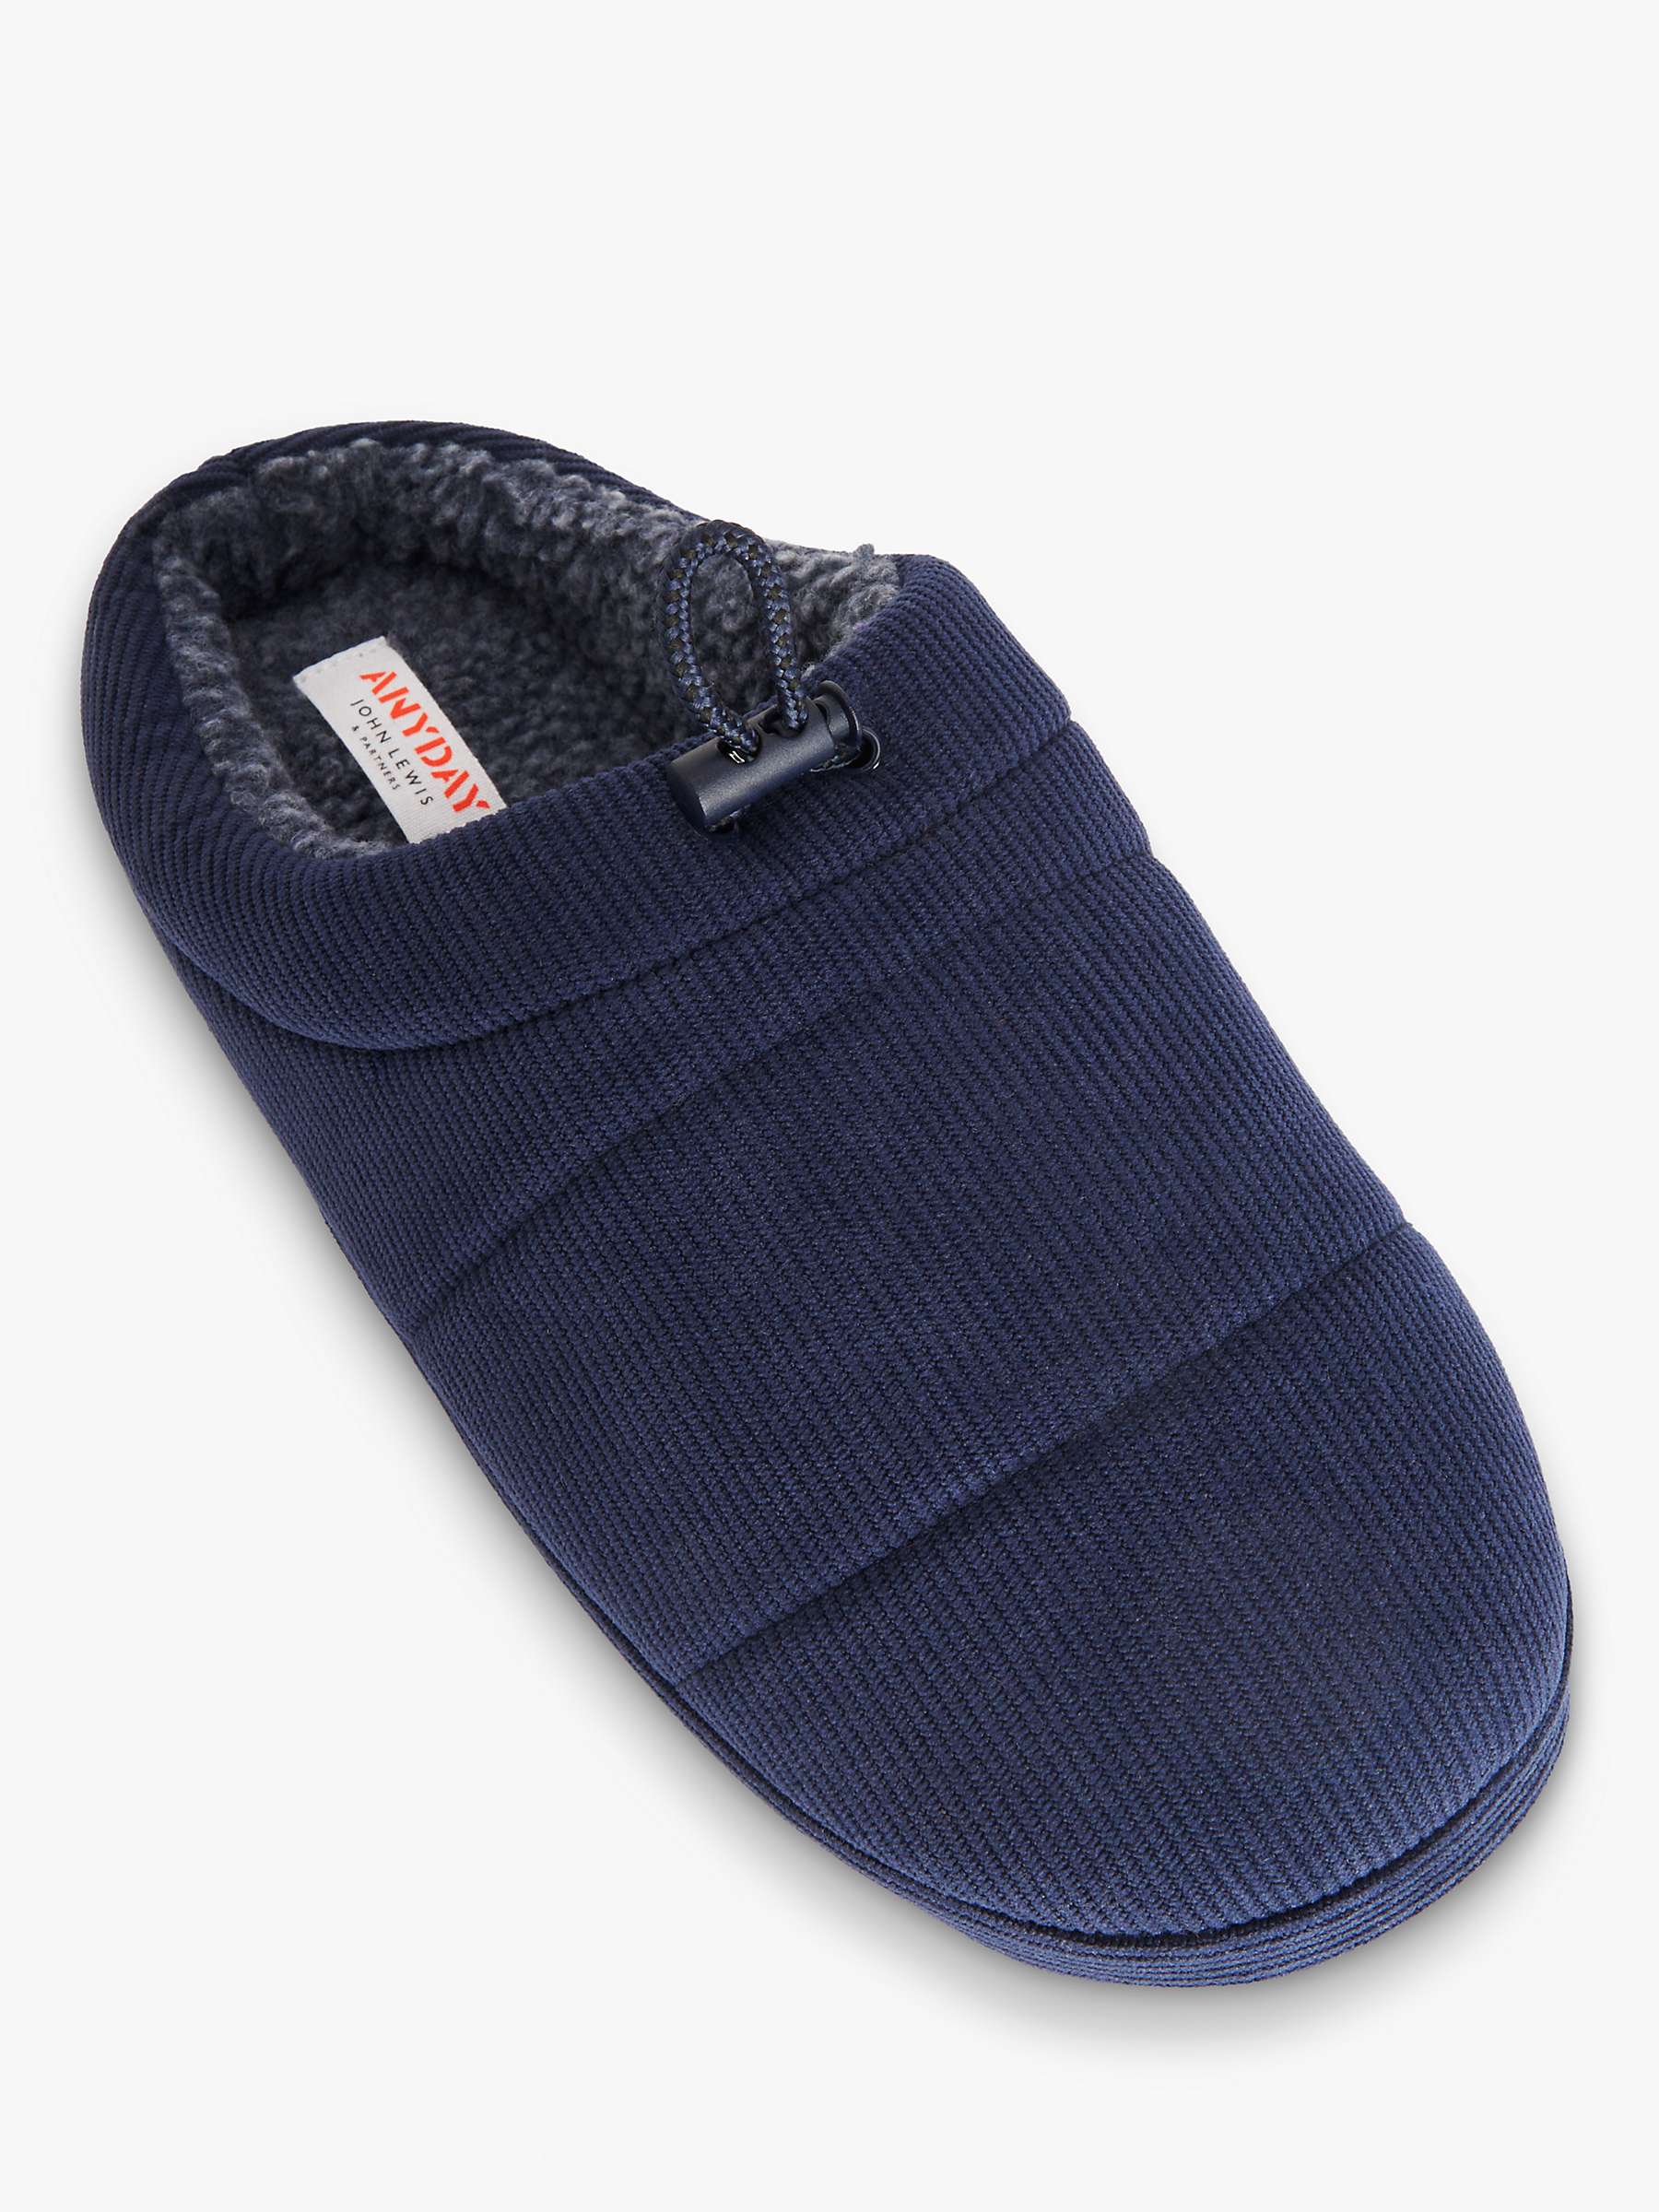 Buy John Lewis ANYDAY Cord Mule Slippers Online at johnlewis.com